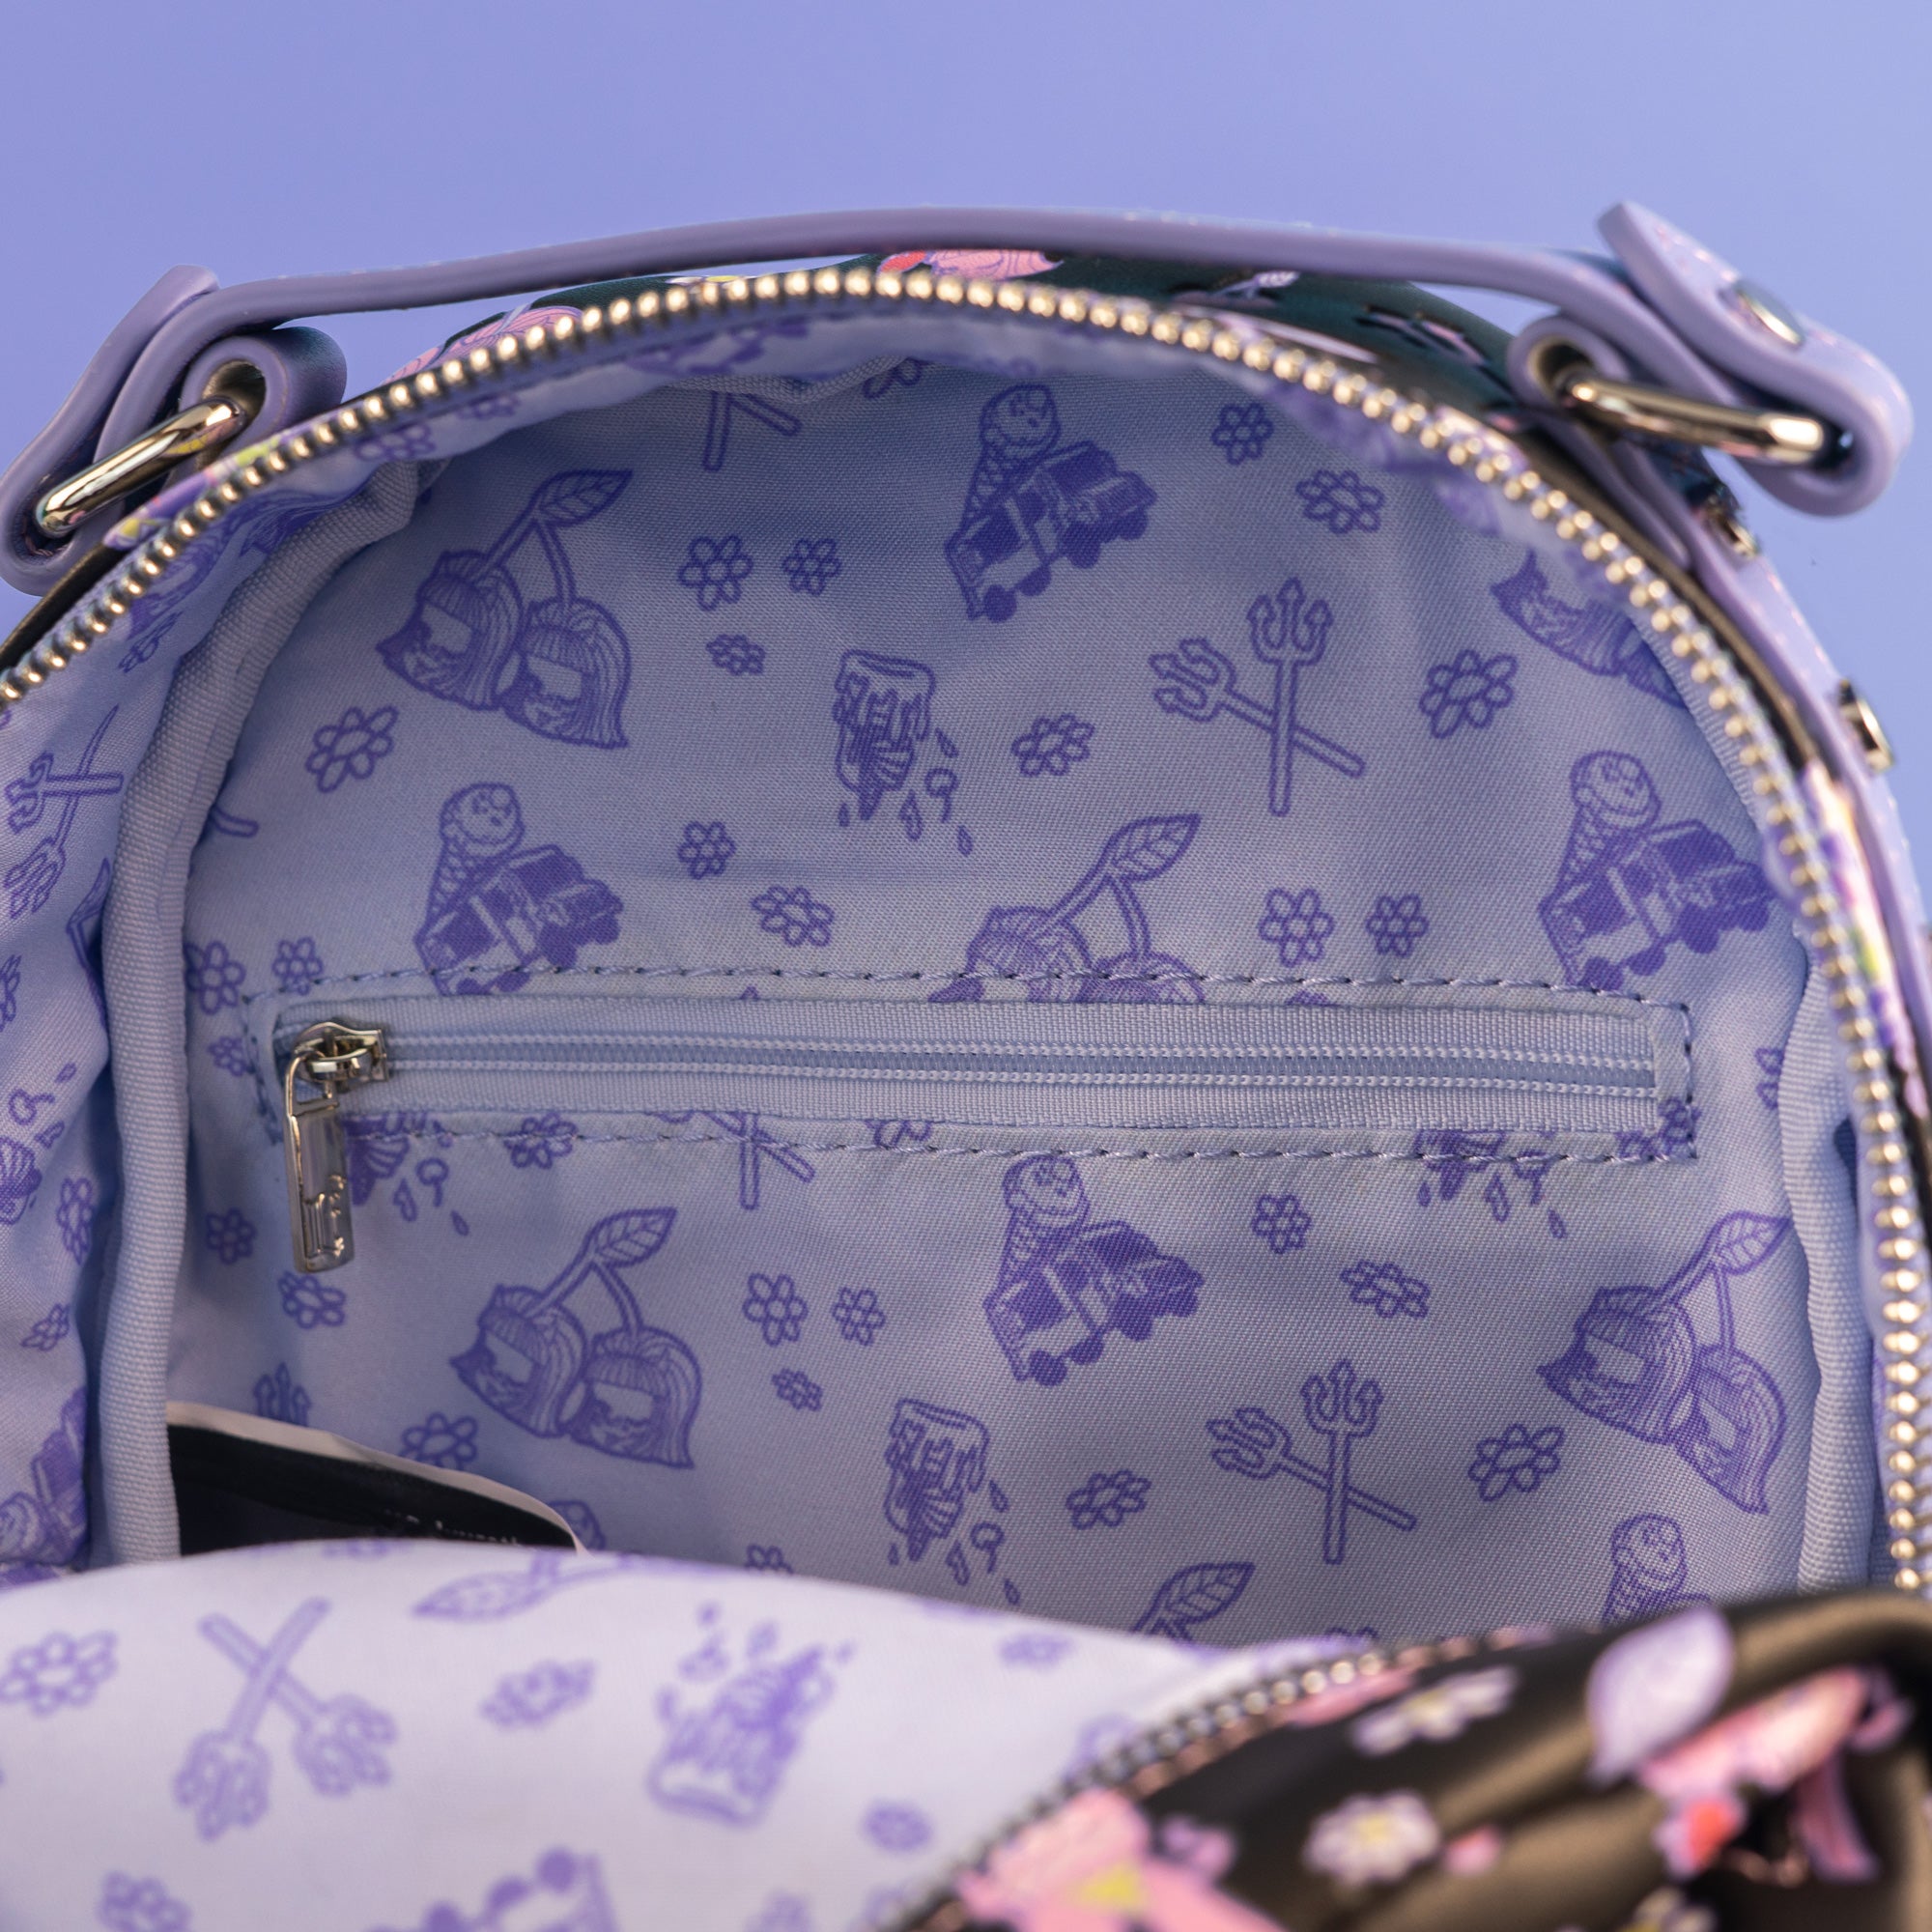 Loungefly x Valfre Lucy All Over Print Mini Backpack